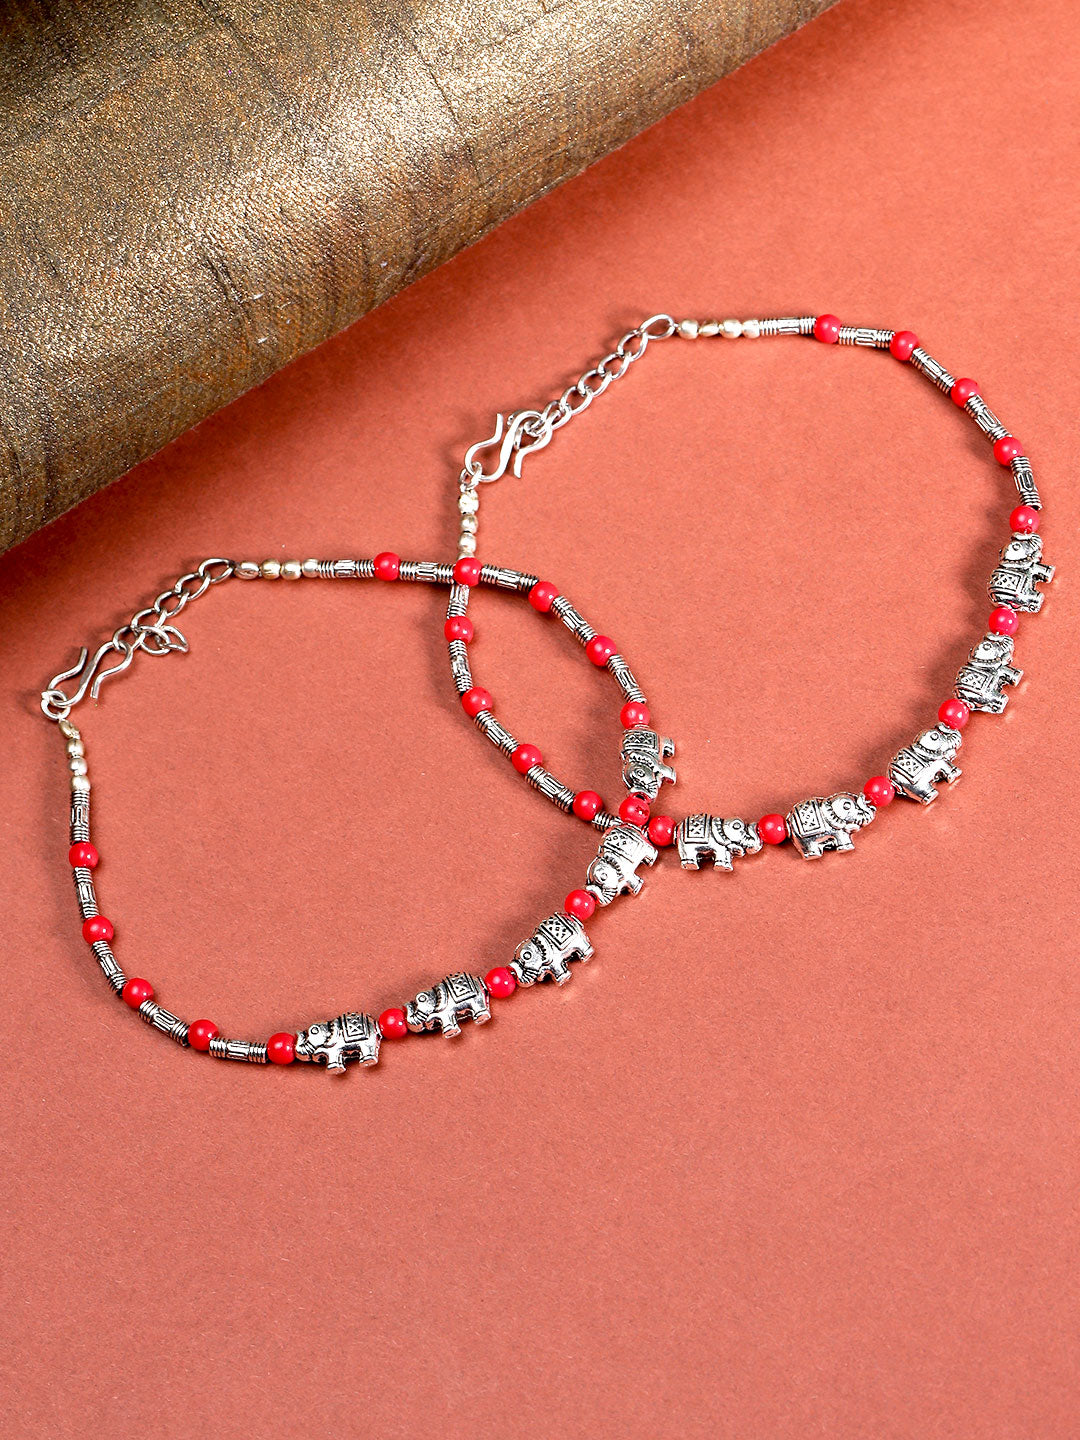 Elephant Inspired Oxidised Silver-Toned & Red Beaded For Women And Girls